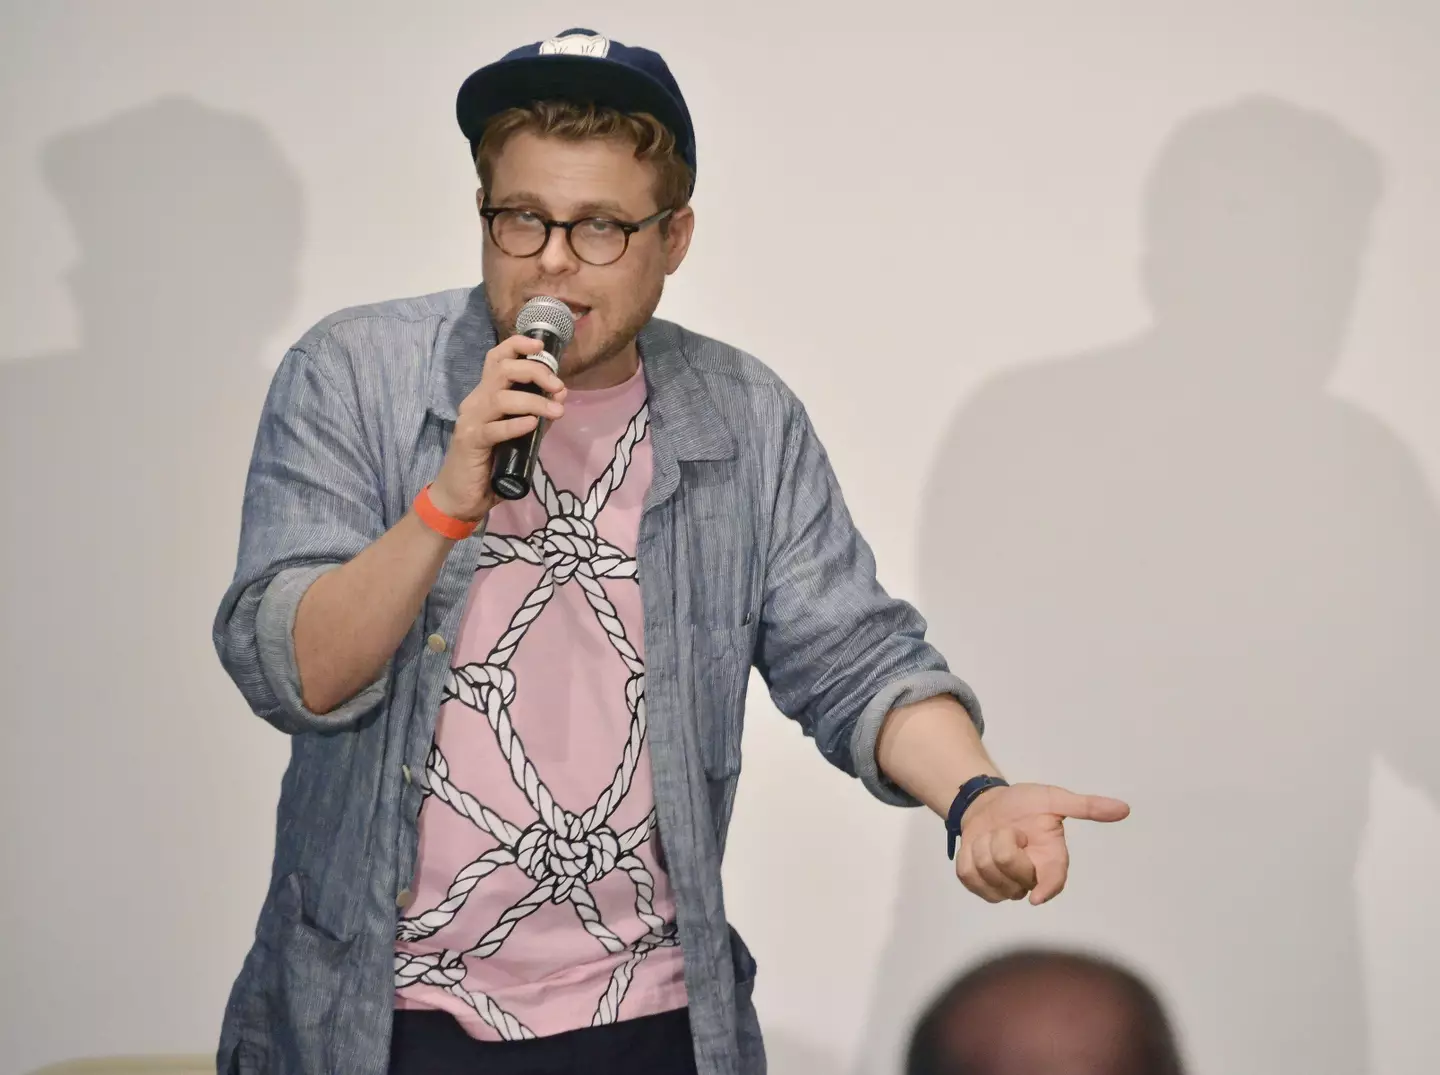 Adam Conover on stage at The Comedy Comedy Festival.